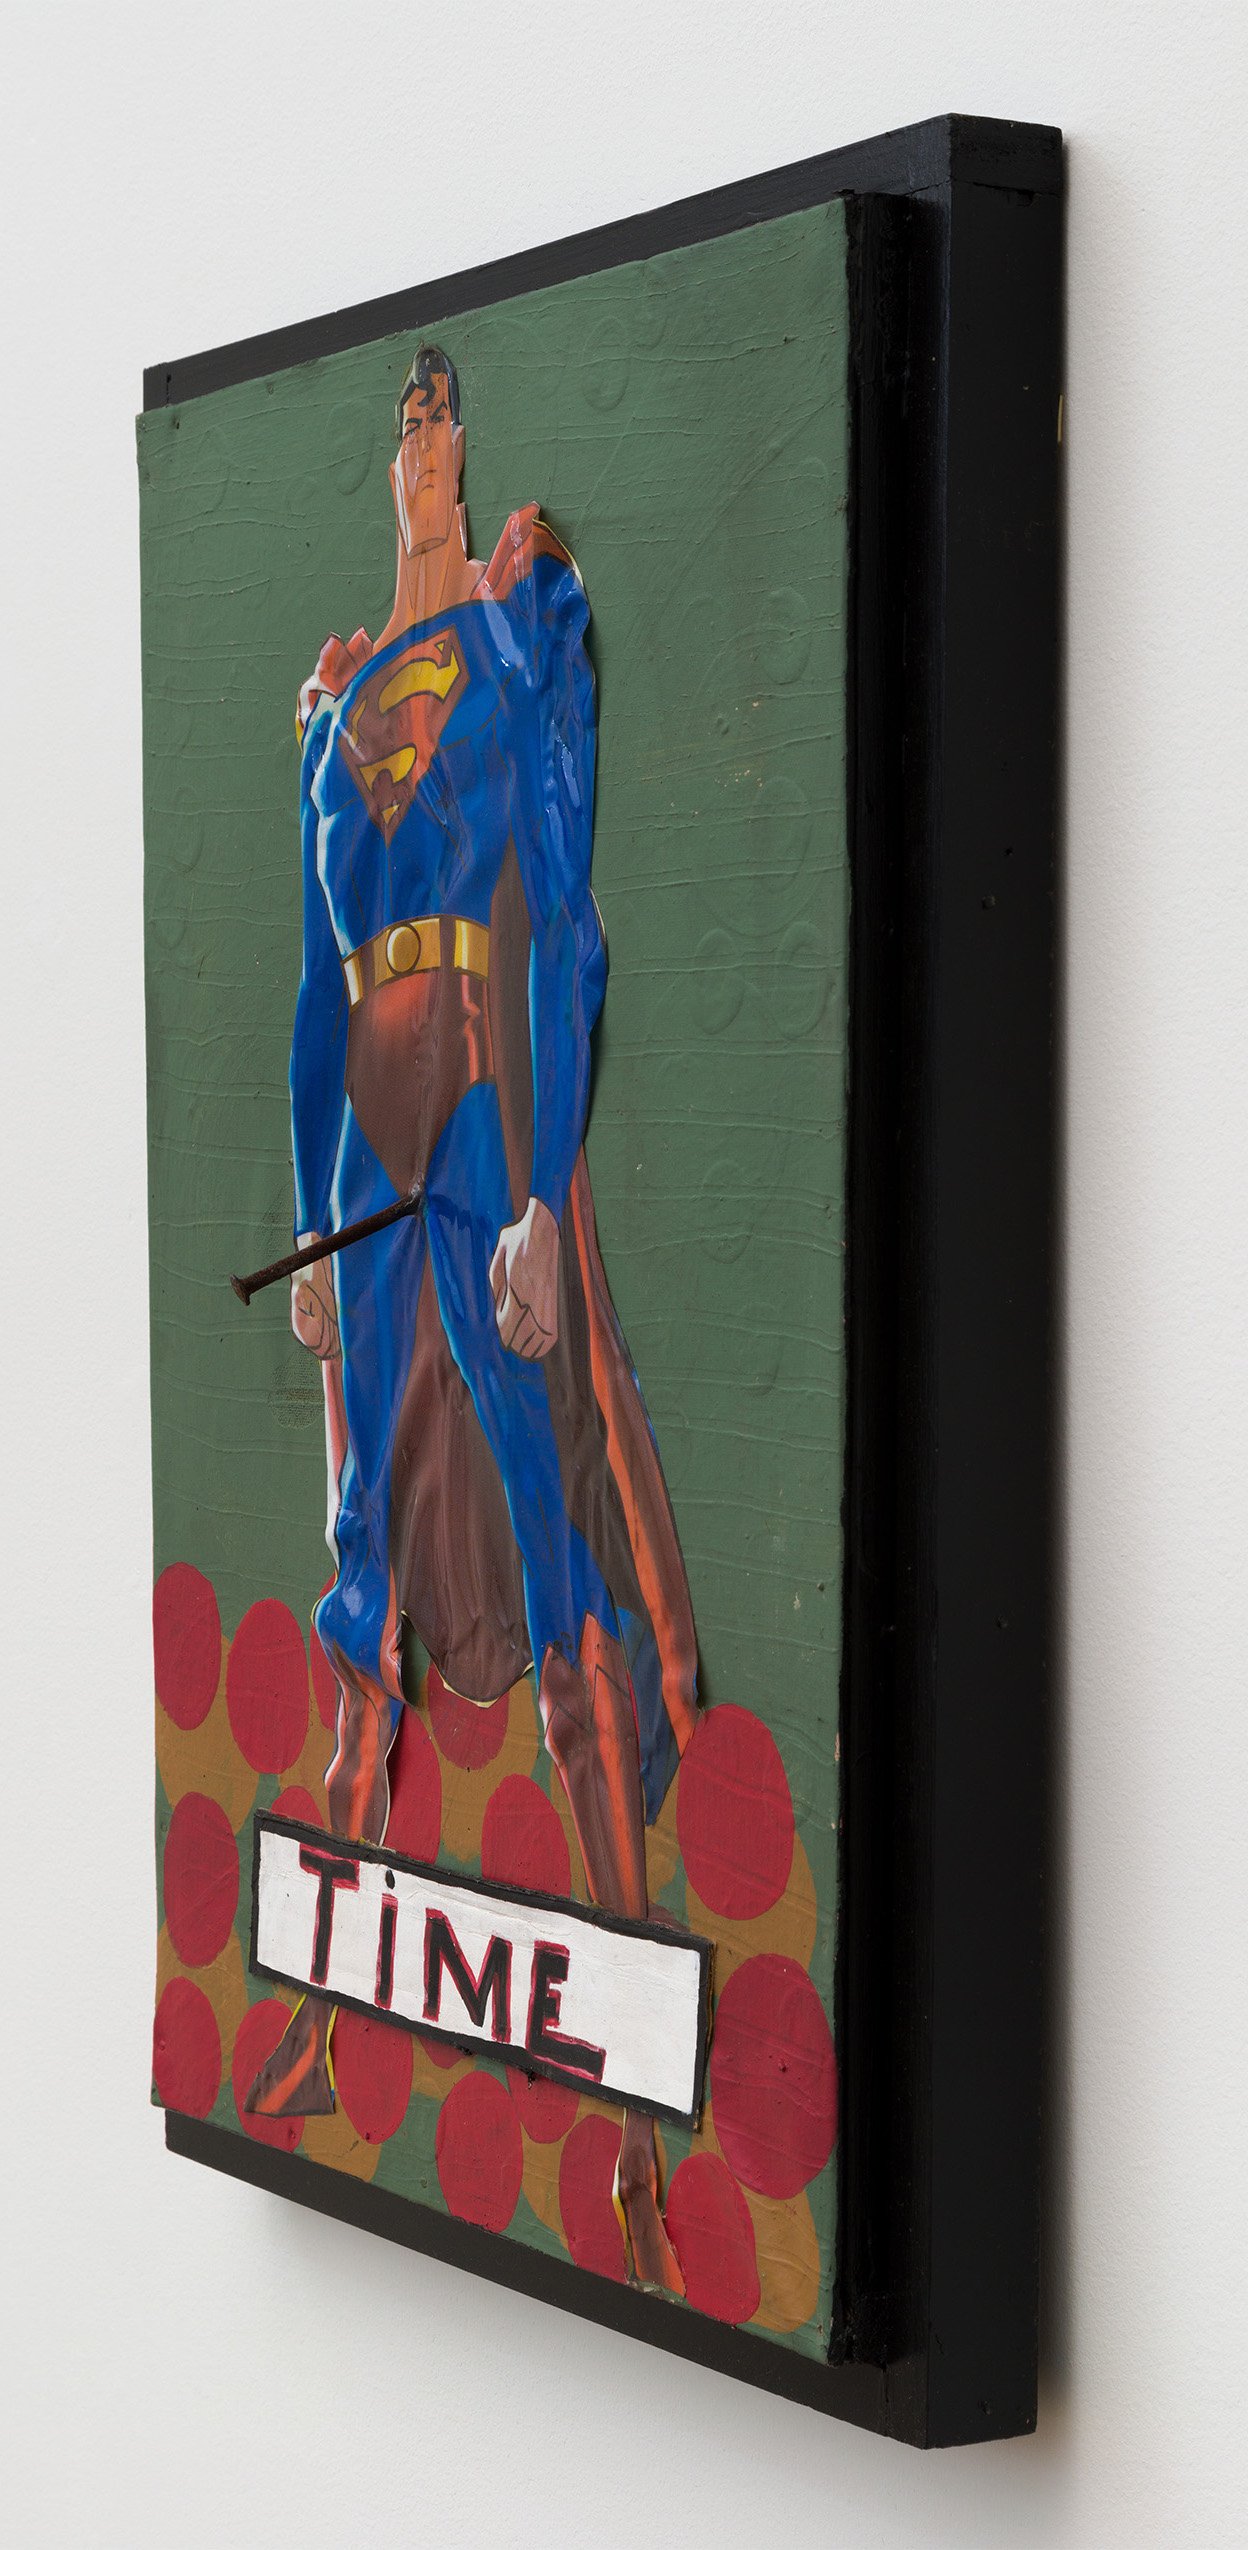  Tyree Guyton,  Man of Steel , 2010, paint on wood with plastic, 19 1/2 x 25 1/2 in 